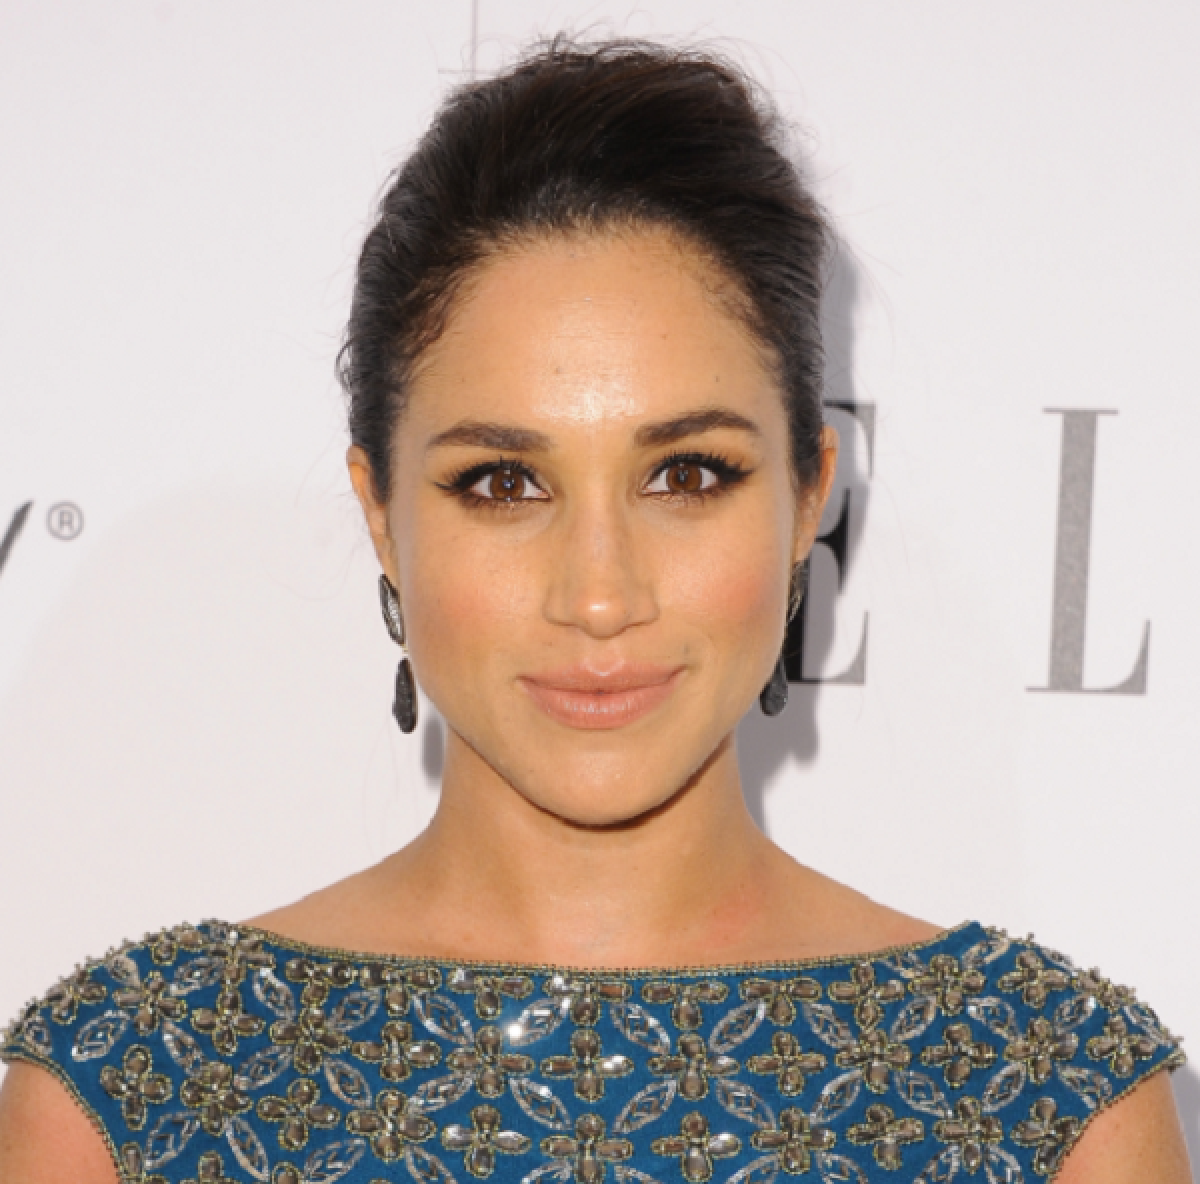 Megan Markle slated to attend Pippa Middleton's wedding with Prince Harry